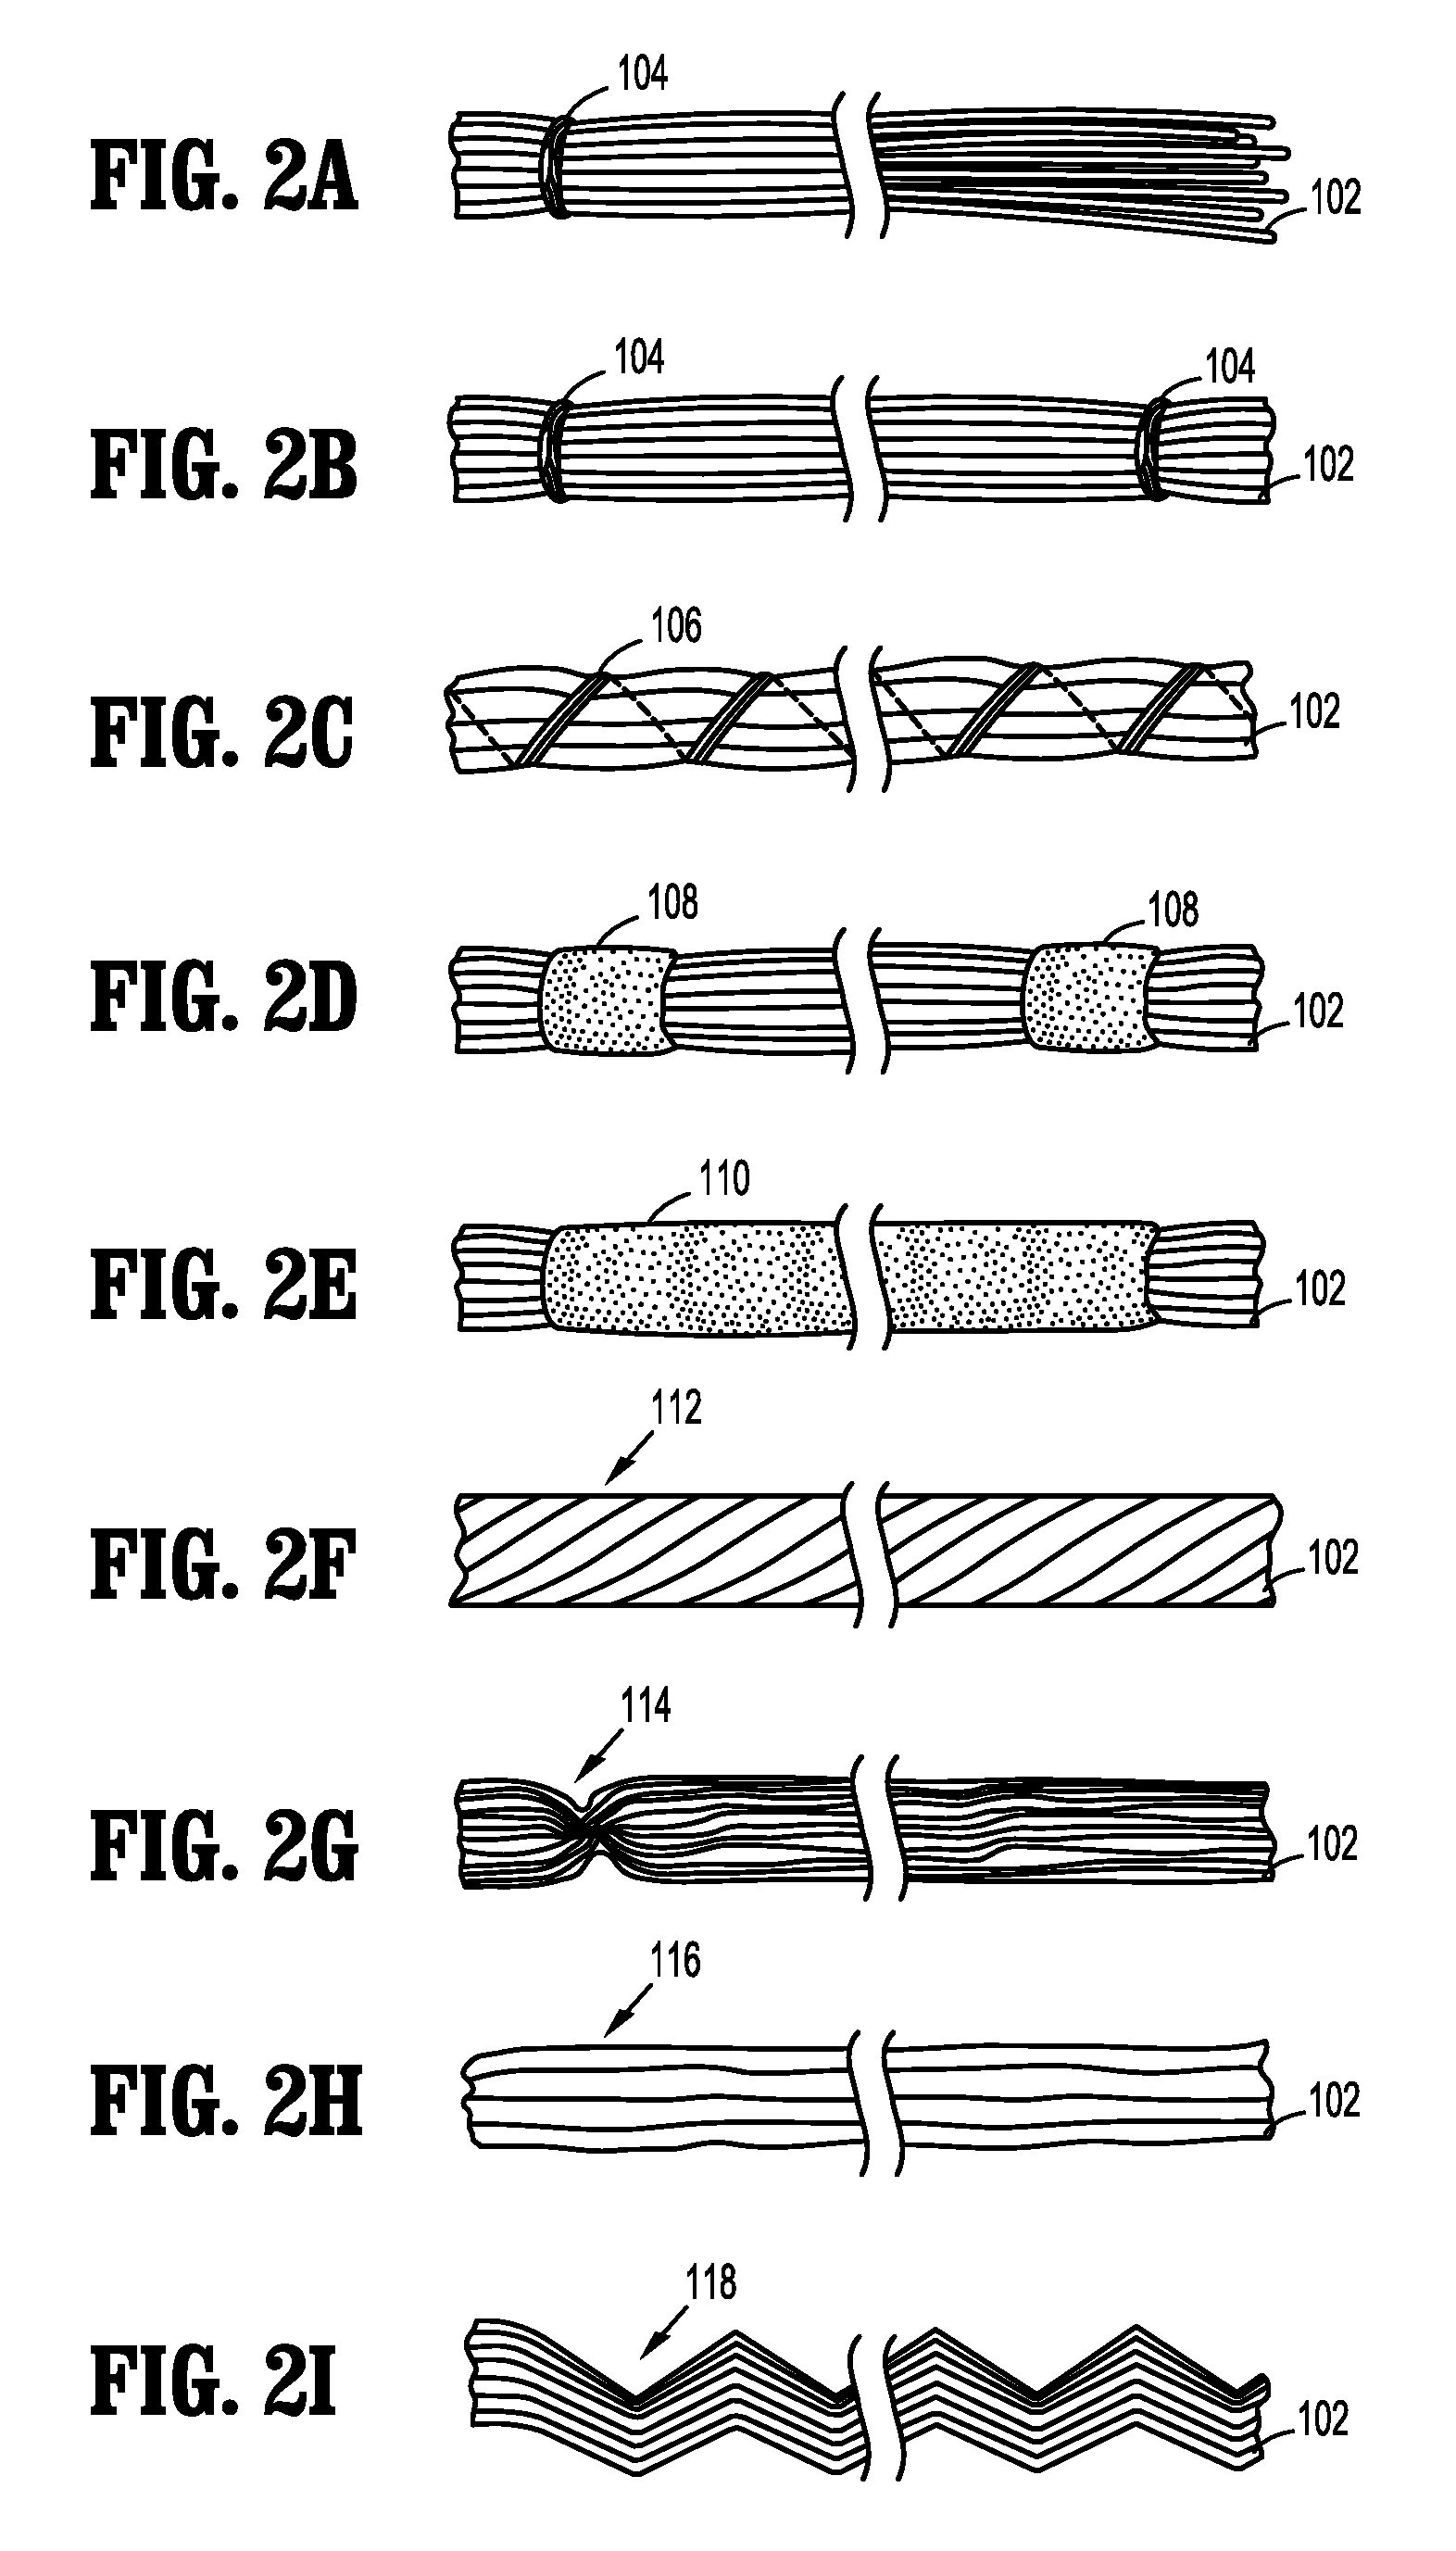 Wound Dressing of Continuous Fibers